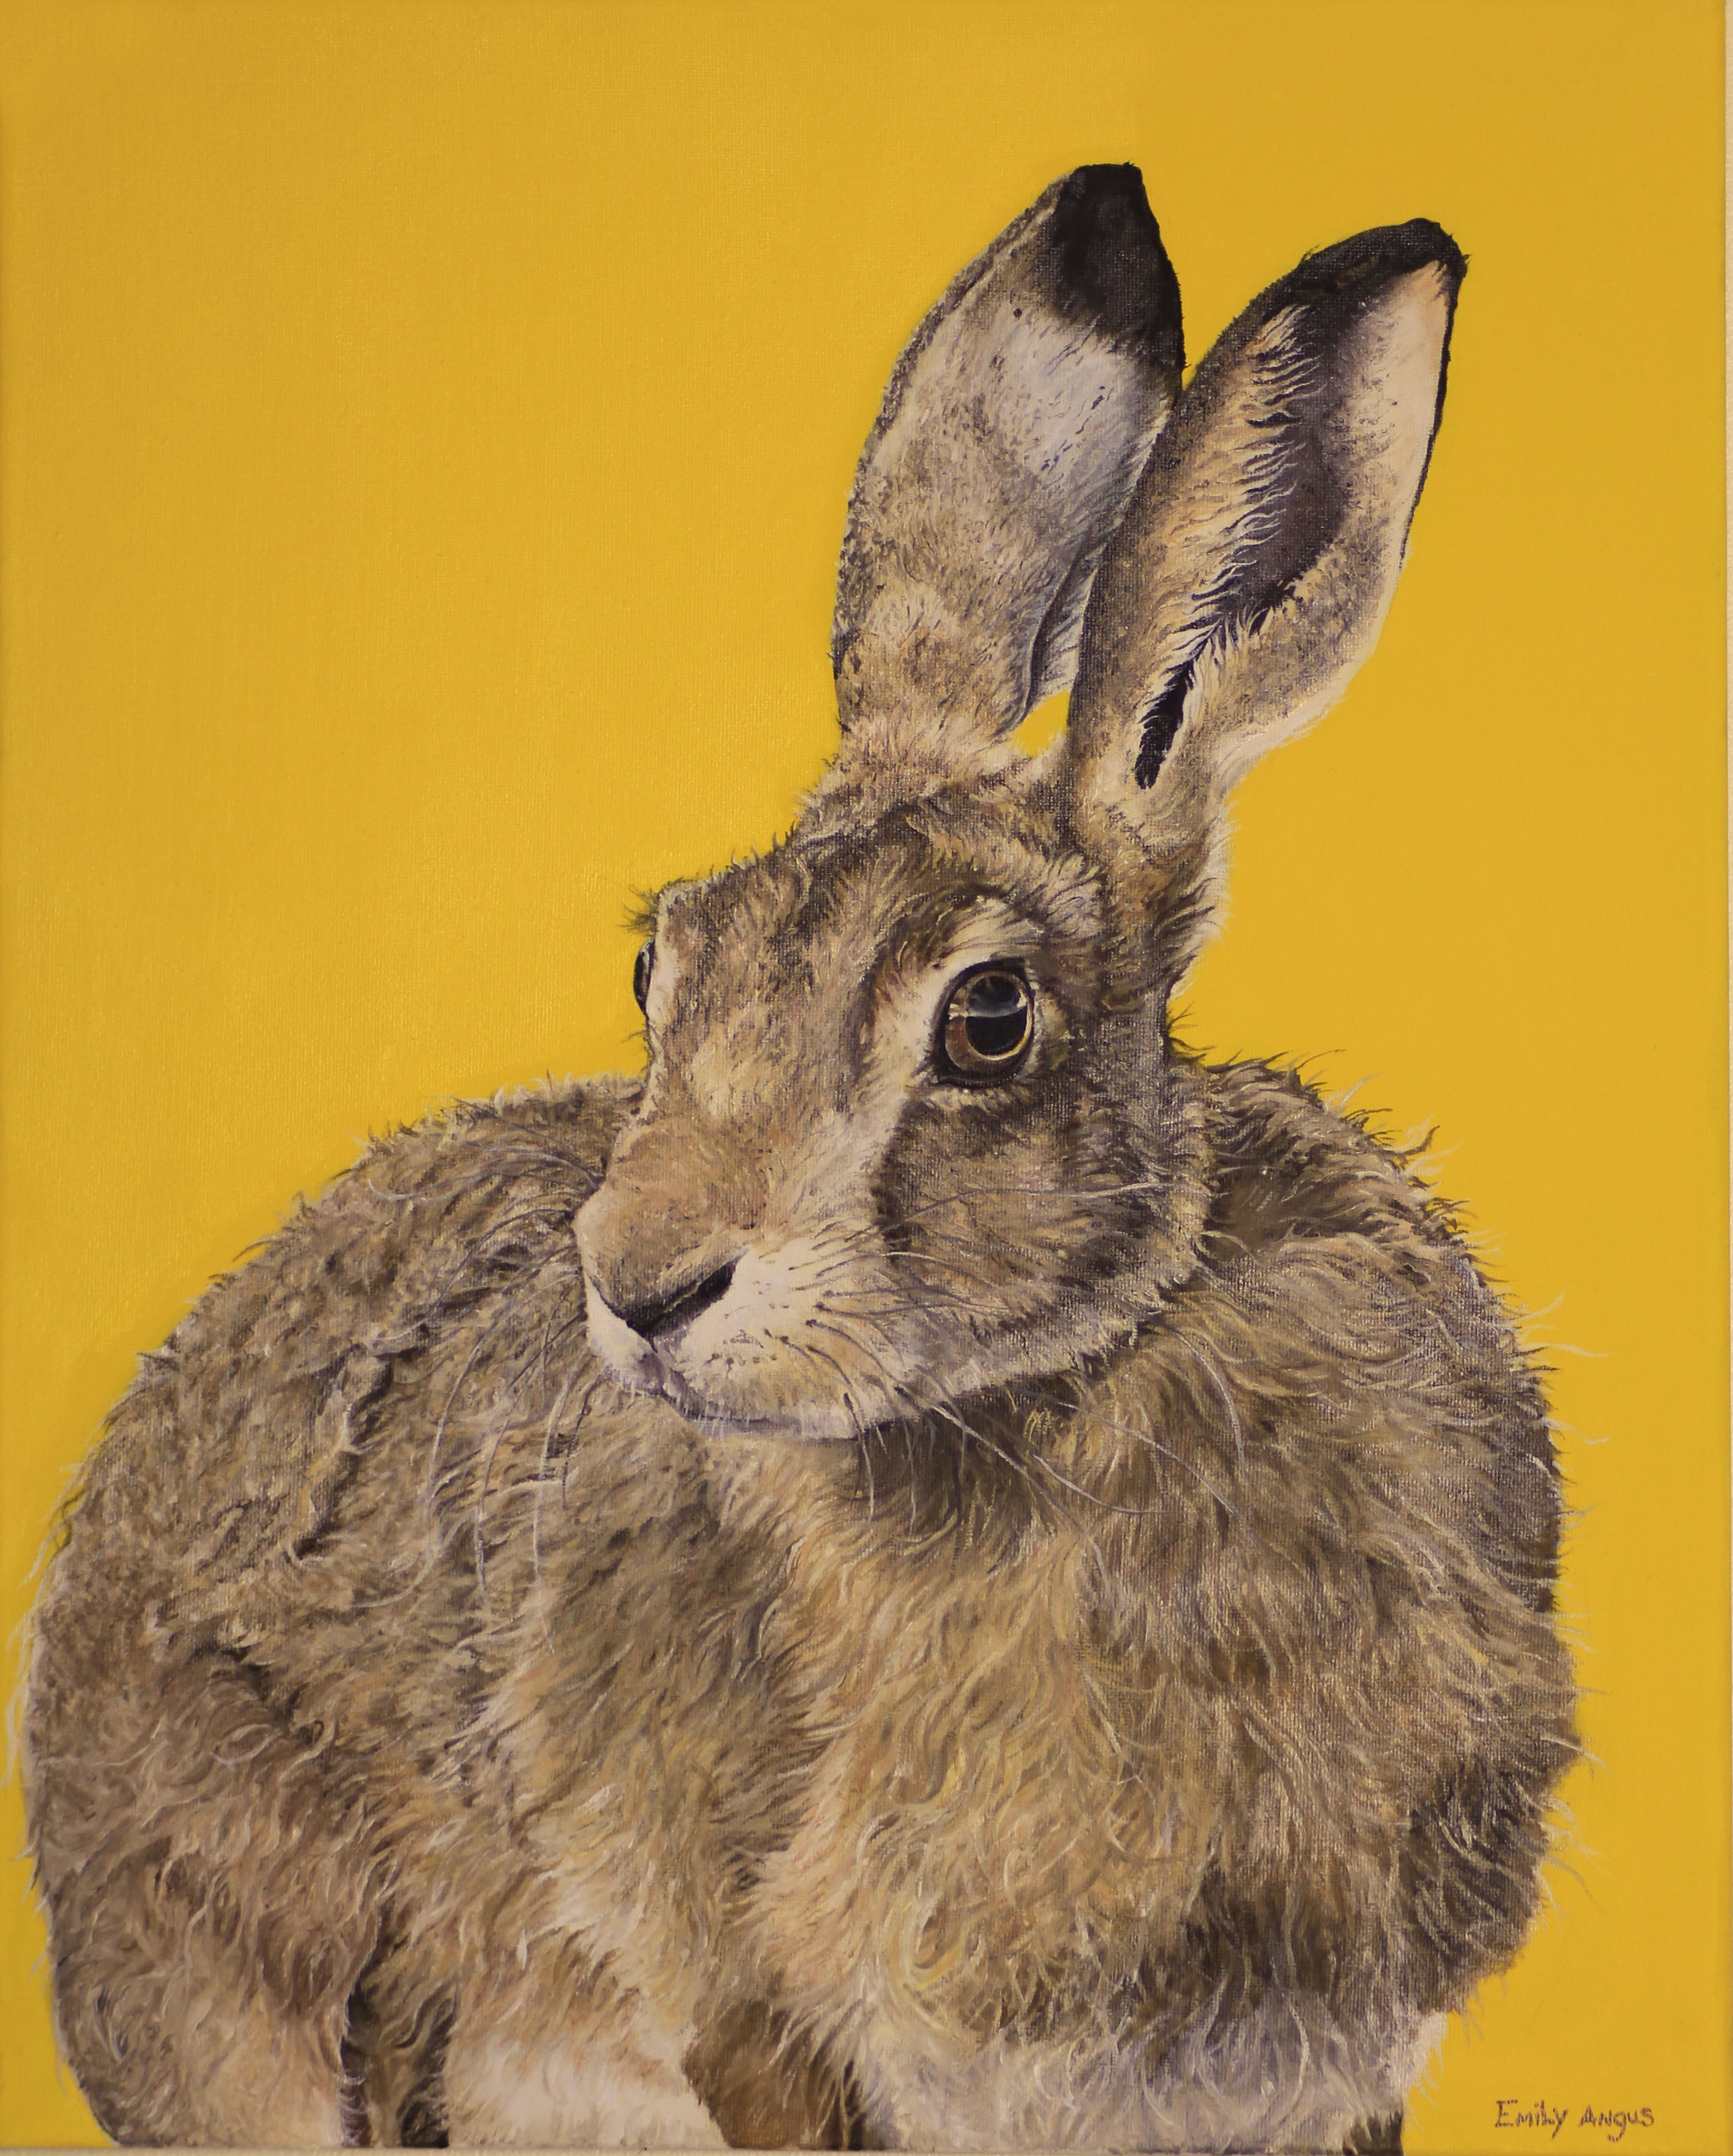 The wild hare - Emily Angus | ~ ~ My Love Of Hares Will ...